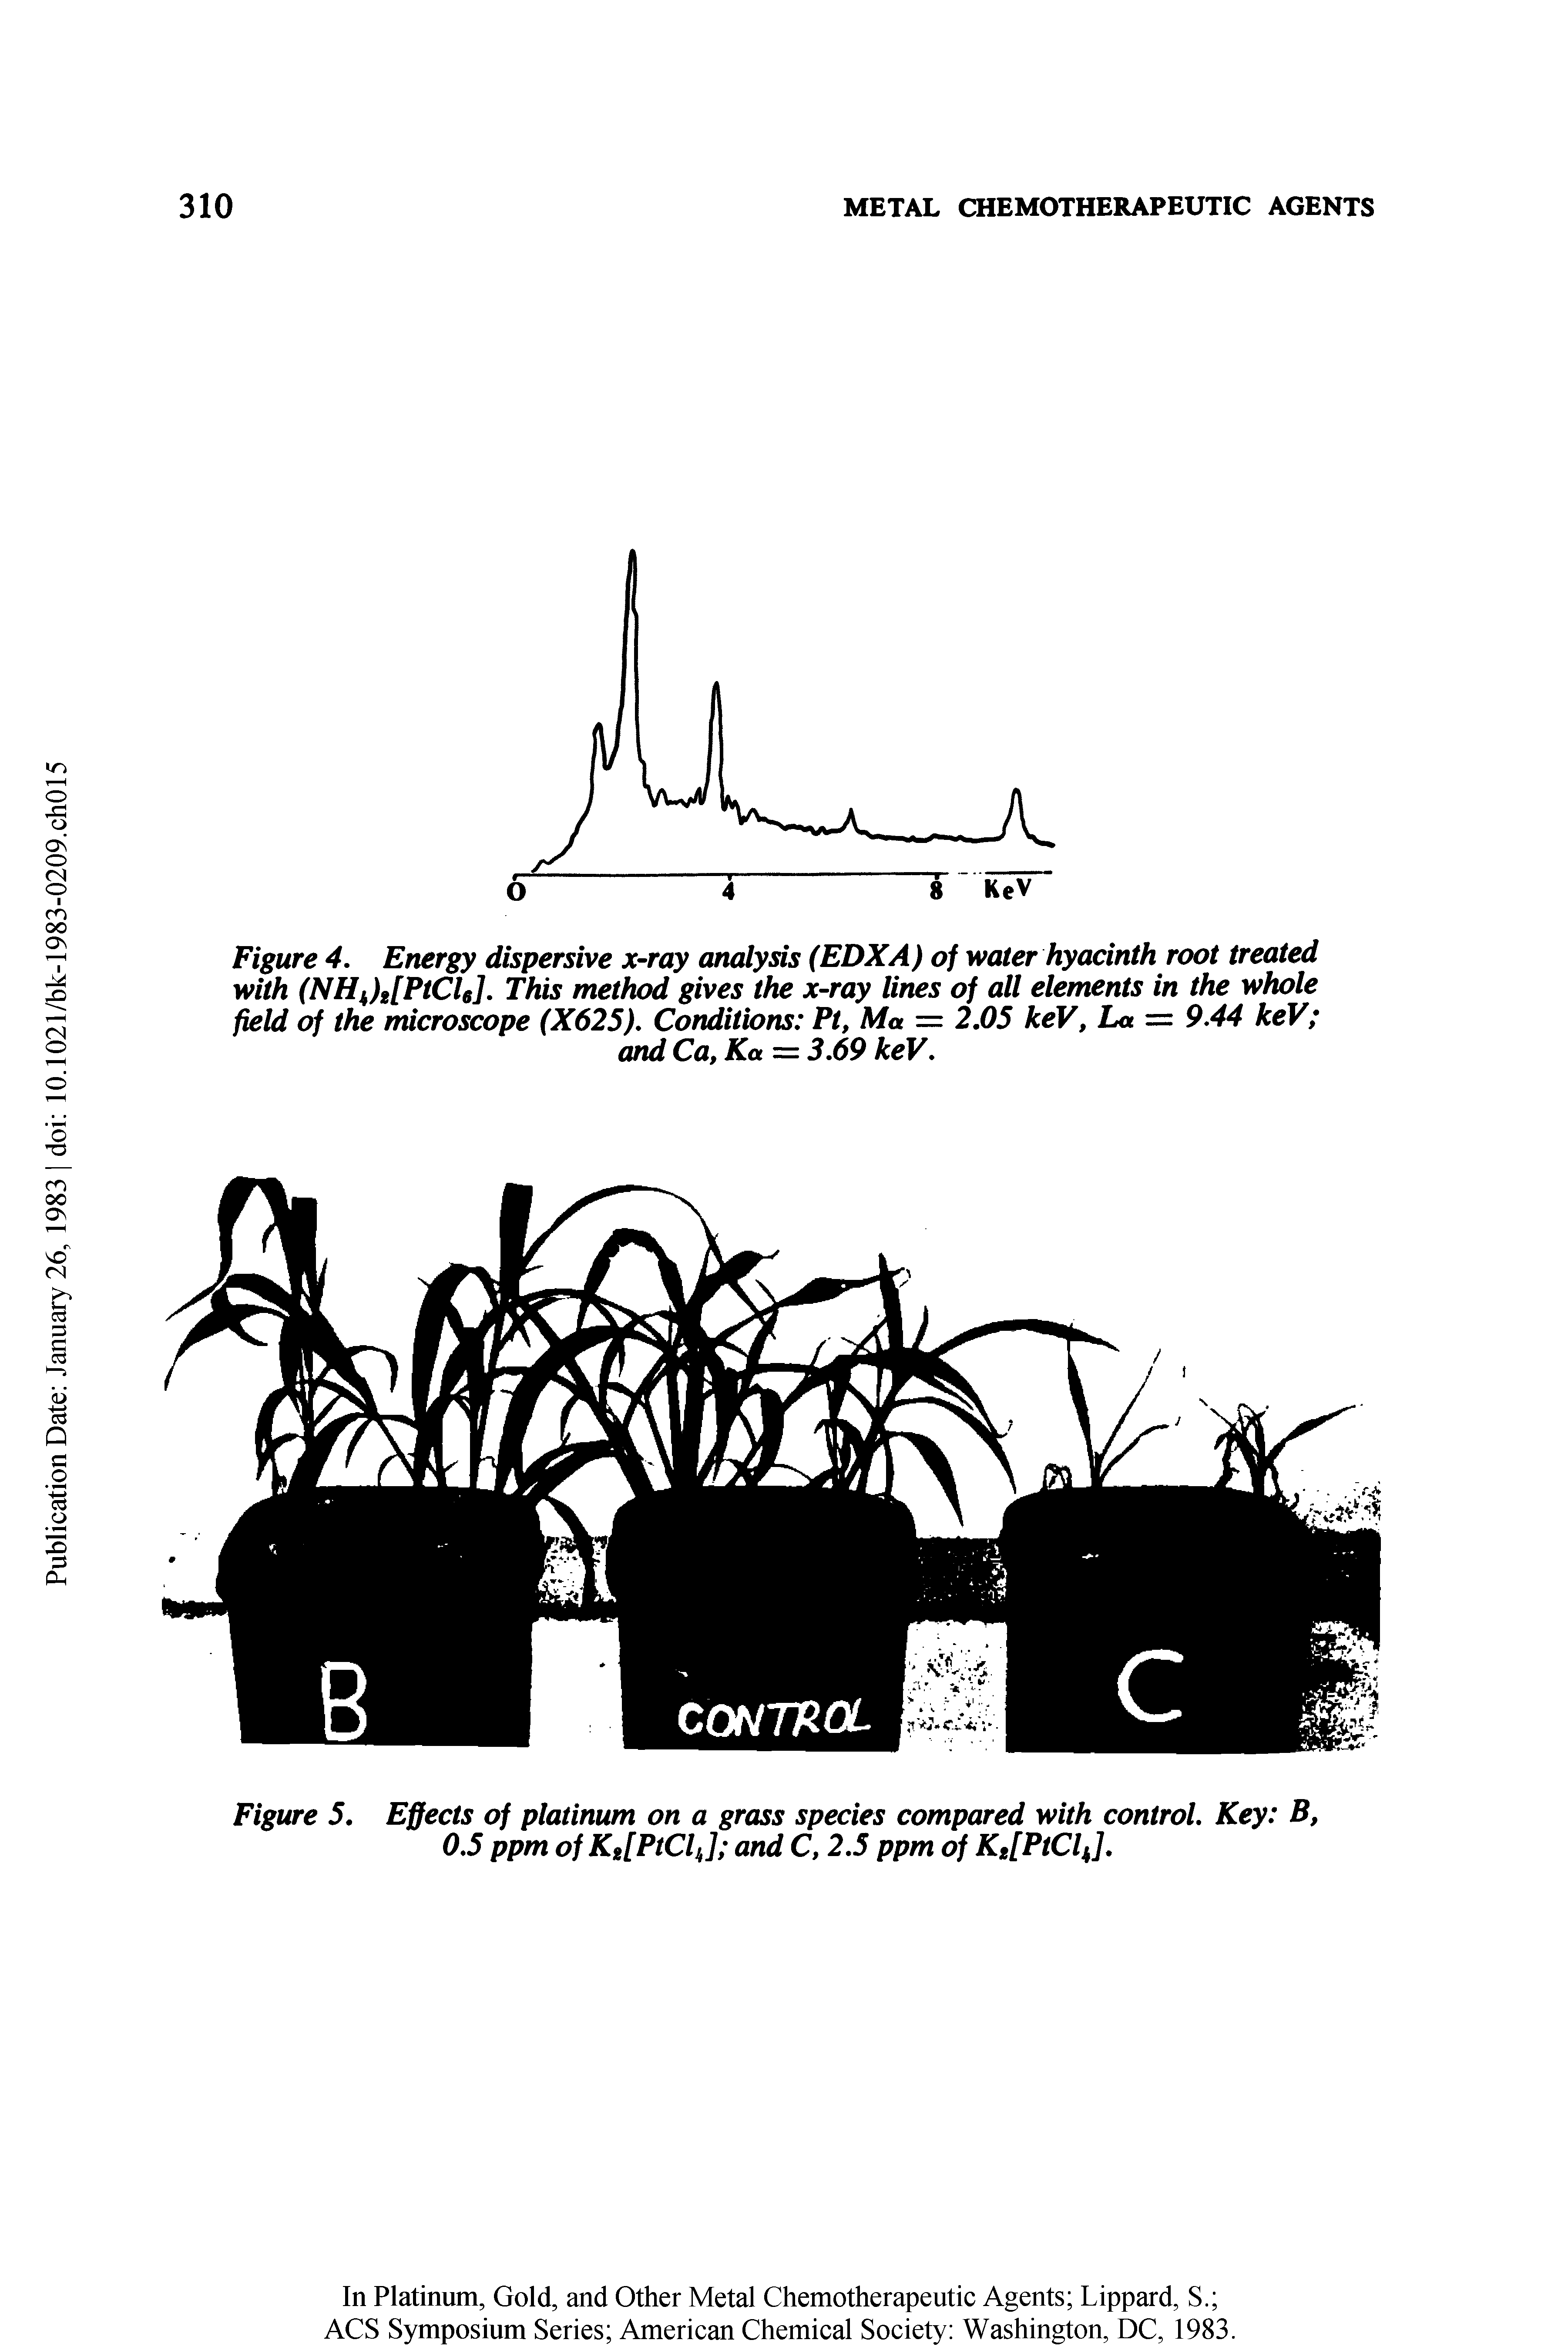 Figure 4. Energy dispersive x-ray analysis (EDXA) of water hyacinth root treated with (NH )i[PtCh]. This method gives the x-ray lines of all elements in the whole field of the microscope (X625), Conditions Pt, Ma — 2.05 keV, La = 9.44 keV and Ca, Ka = 3.69 keV.